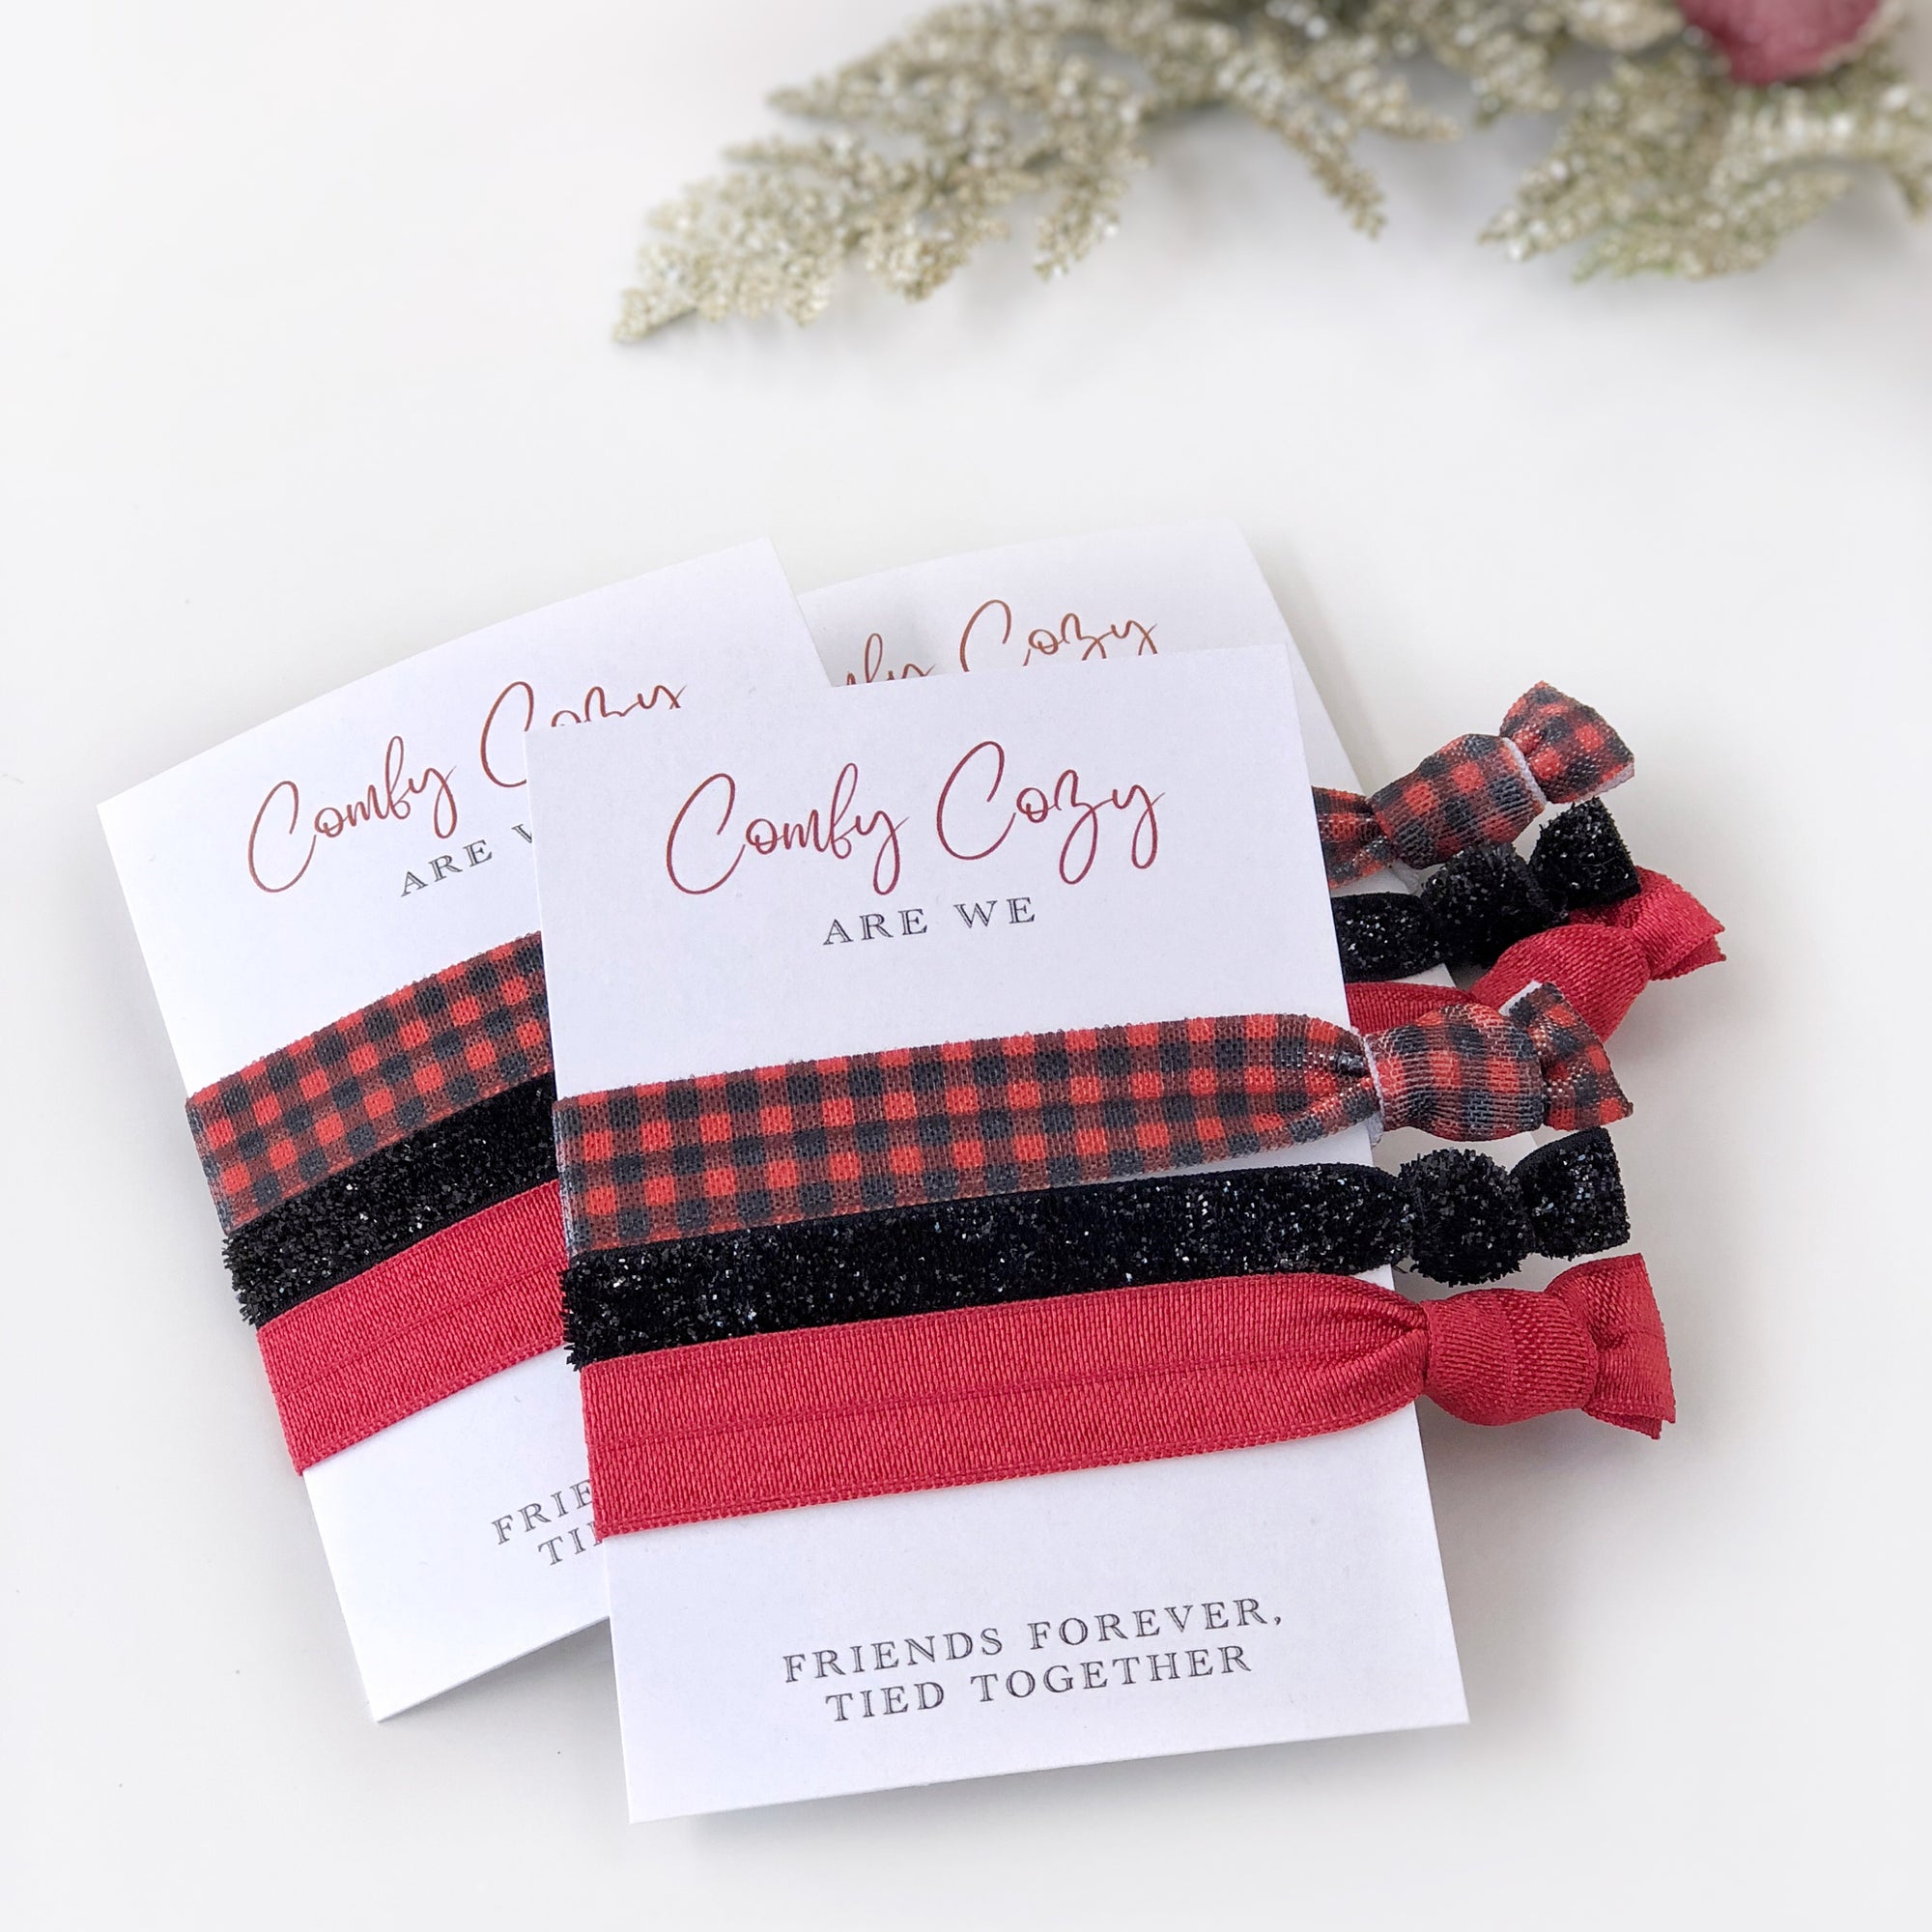 Buffalo Plaid Christmas Party Favors - Hair Tie Gifts for Friends - Stocking Stuffers - @PlumPolkaDot 